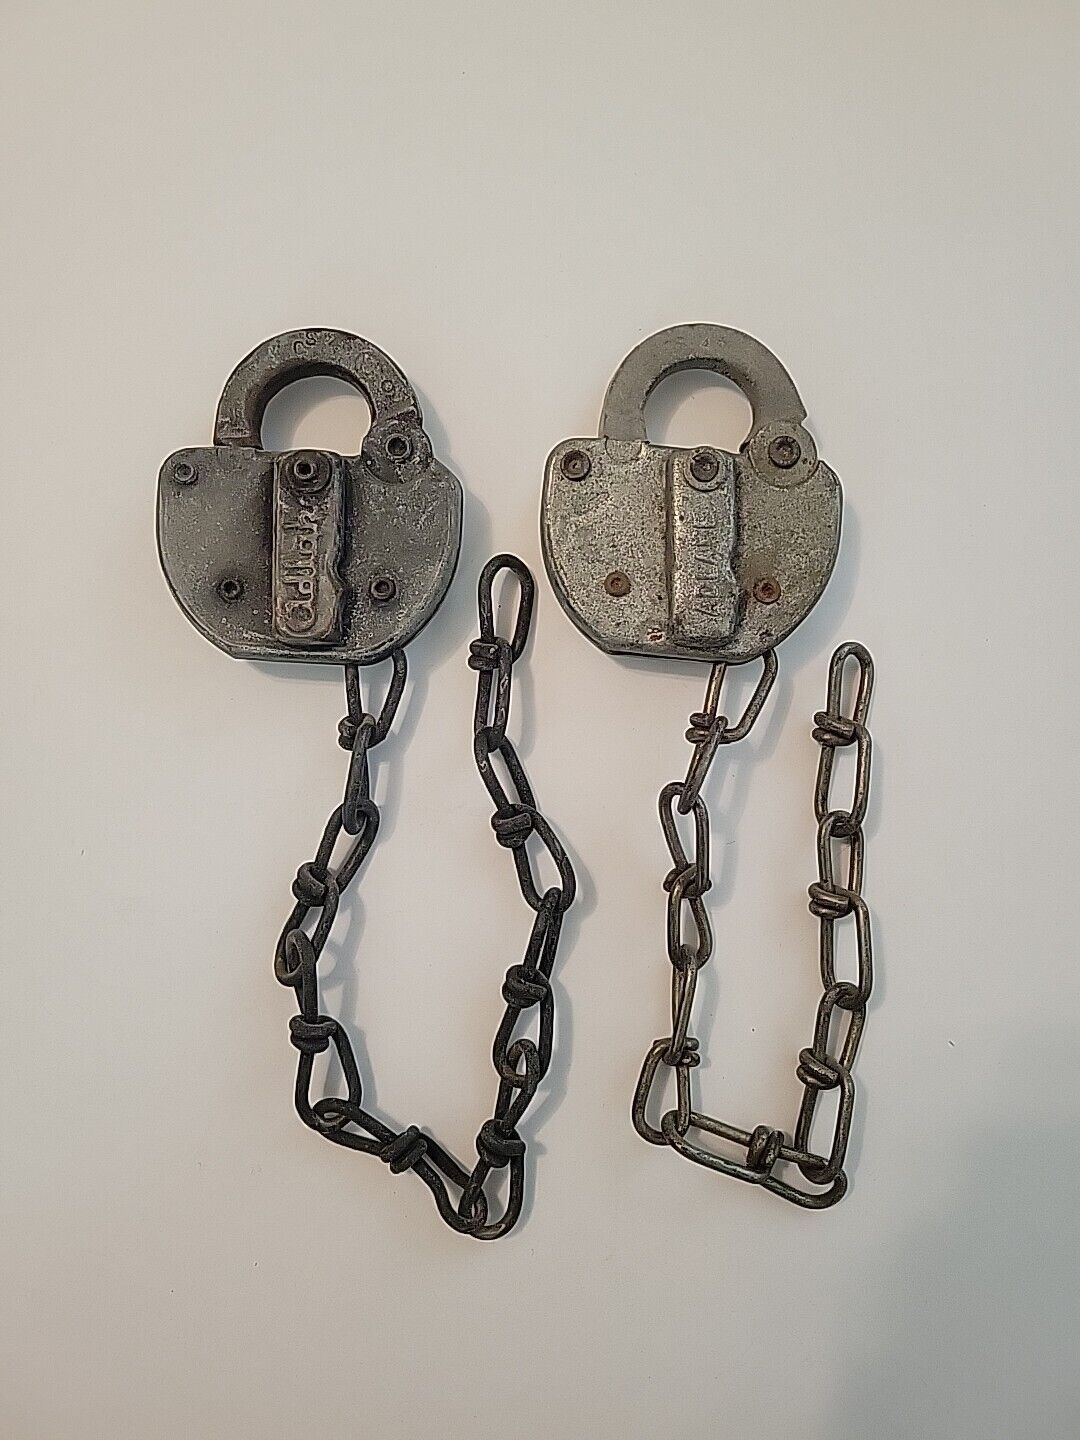 Vintage Pair of Adlake Steel Railroad Lock w/ Chain, No Key, Southern Pacific RR